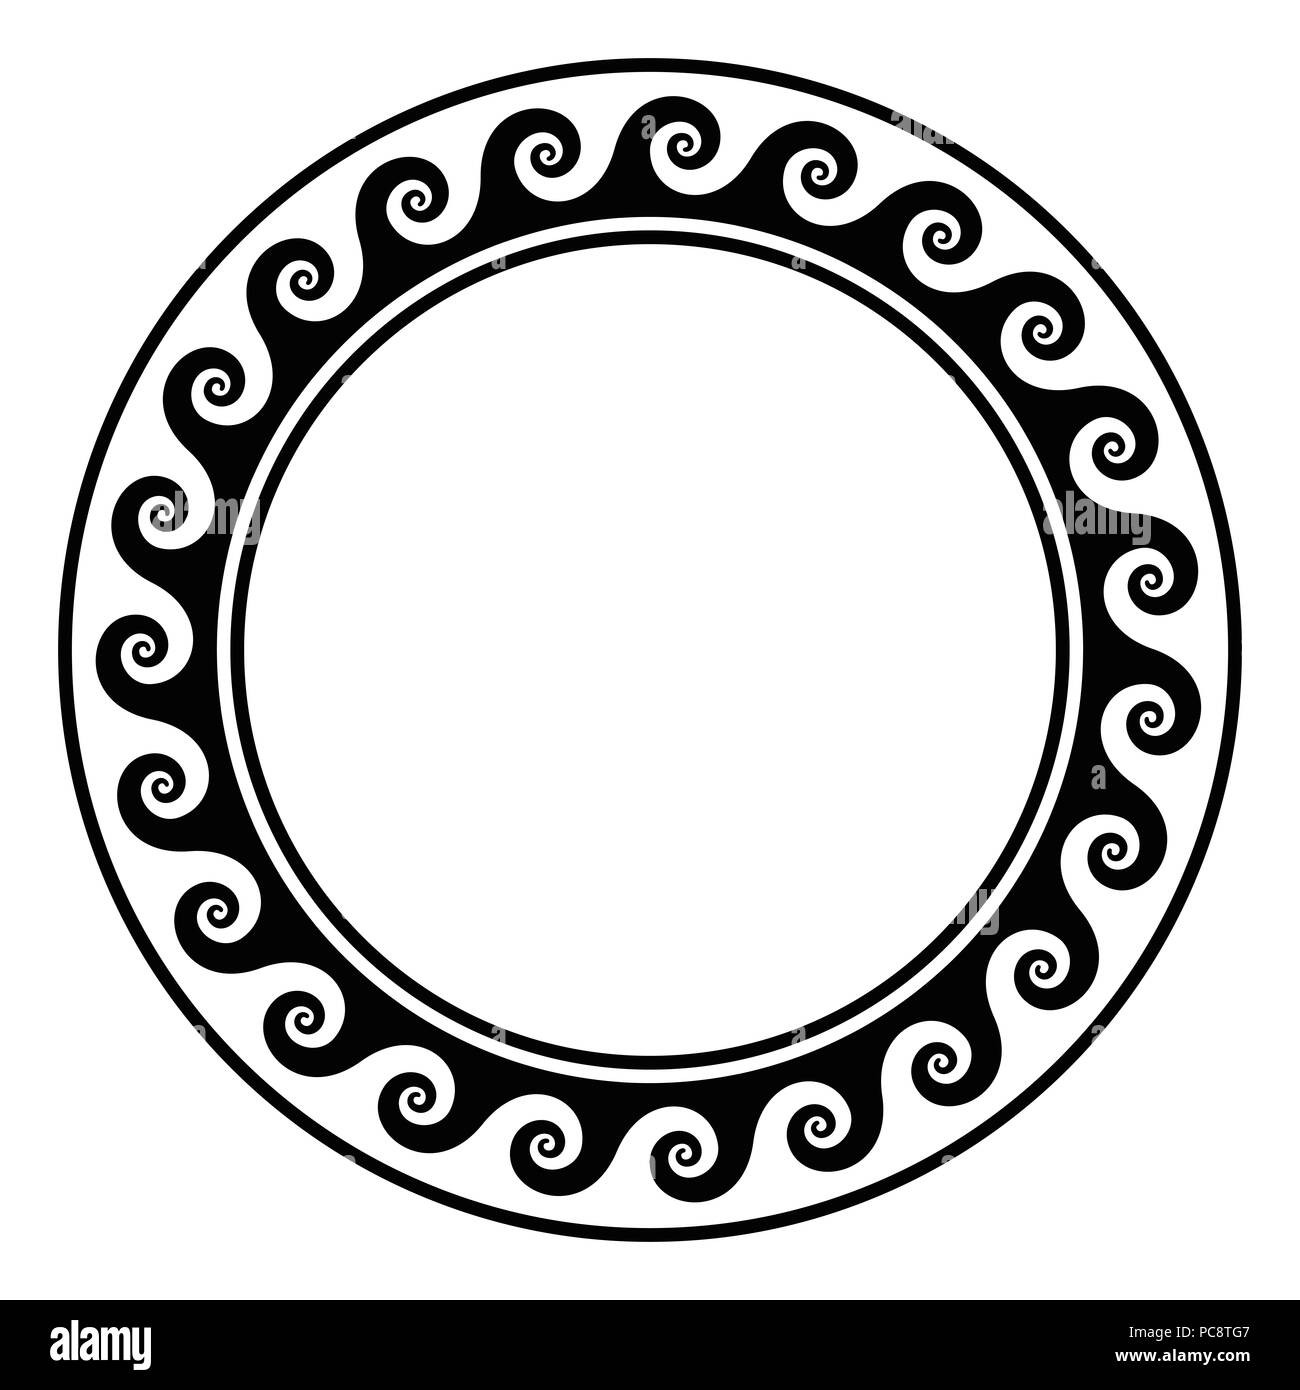 Black circle frame with running dot pattern. Seamless spiral meander design. Waves shaped into repeated motif. Scroll pattern. Decorative border. Stock Photo